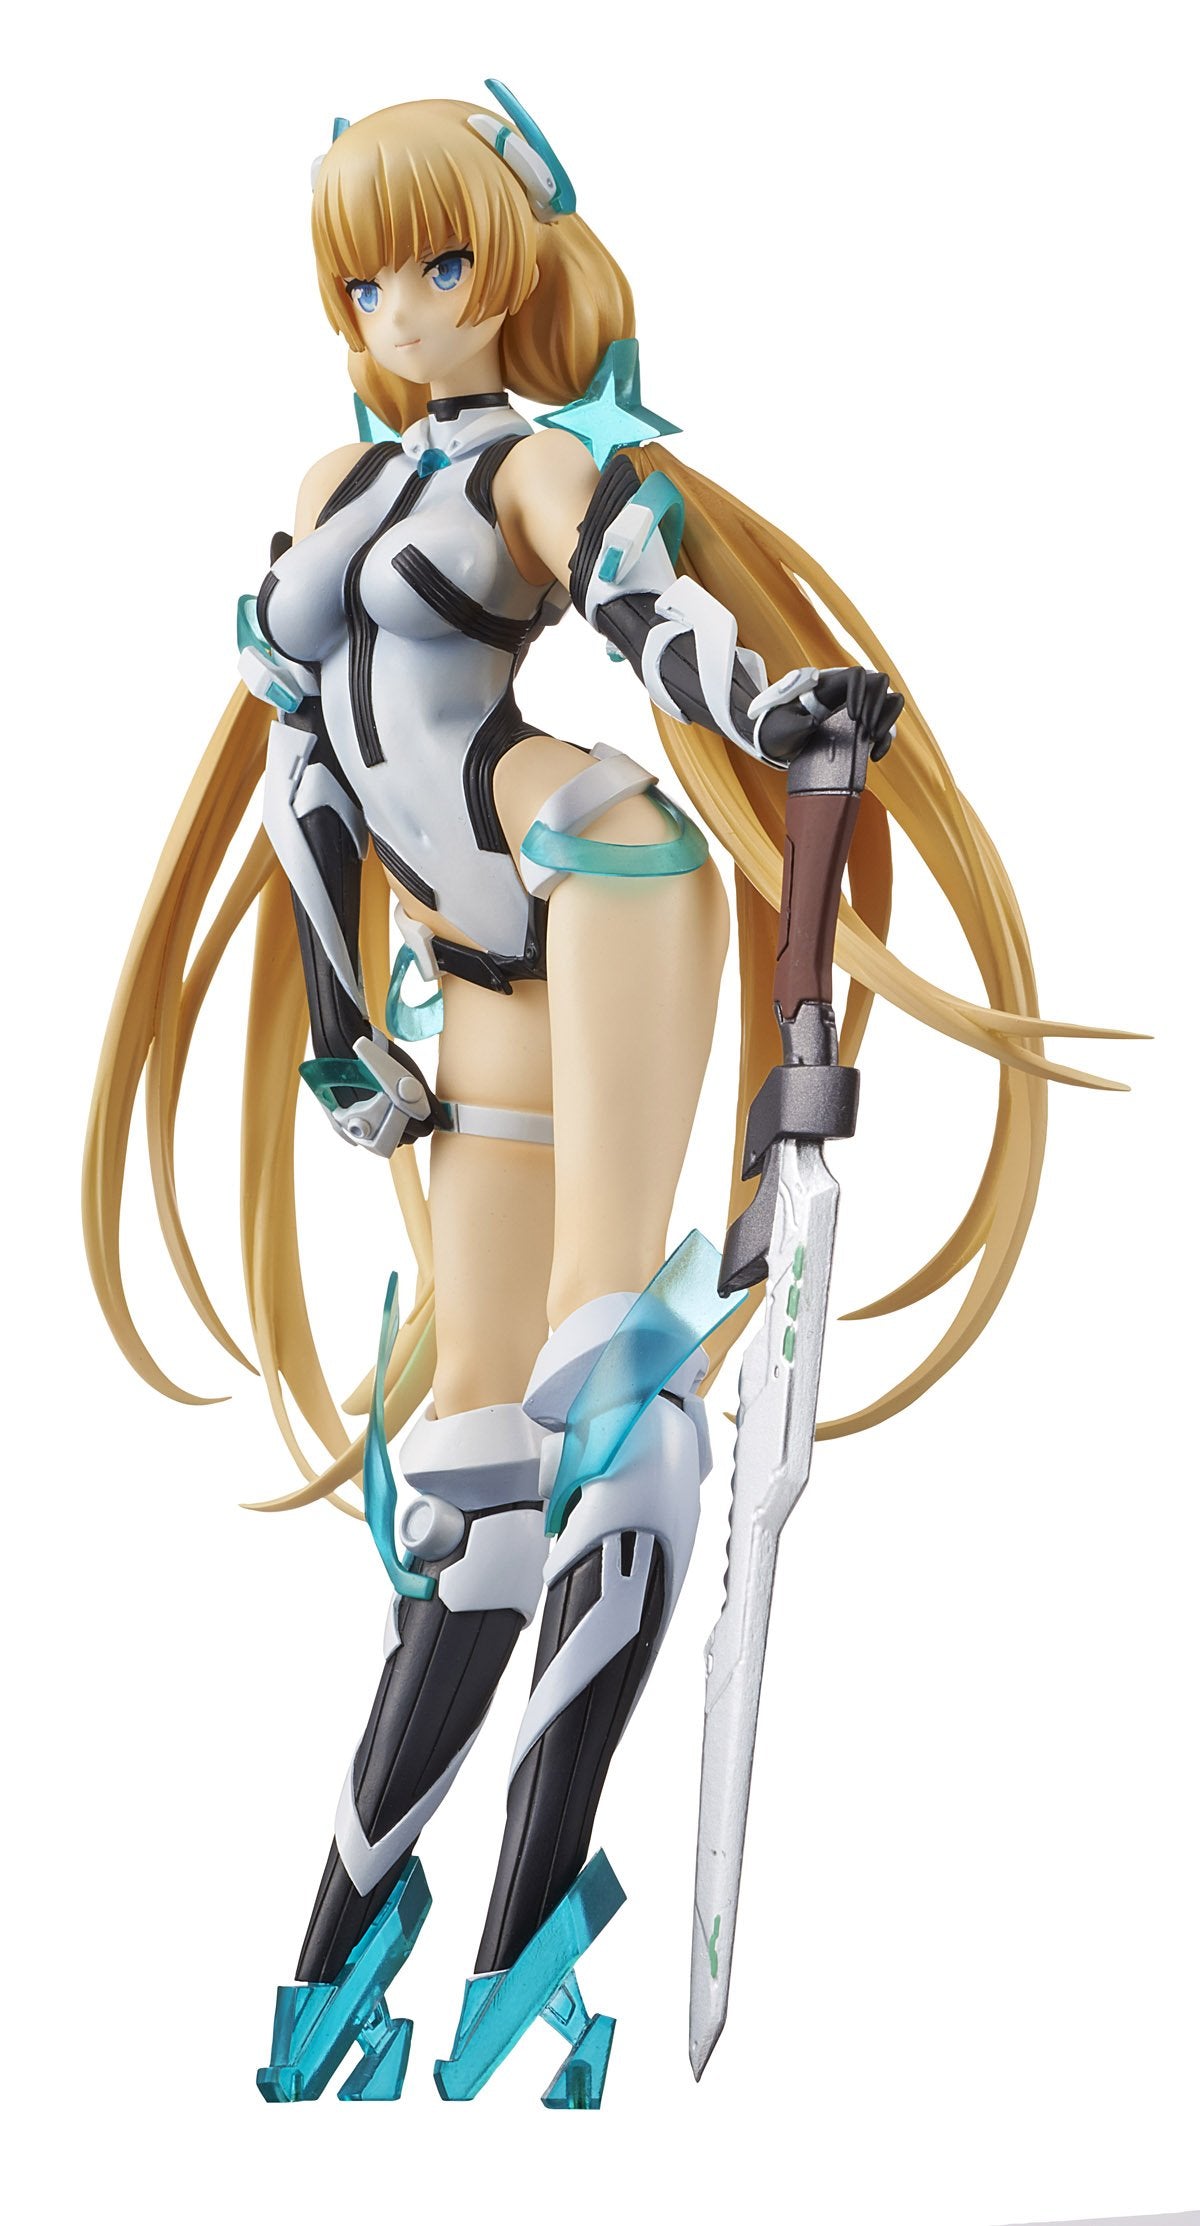 Expelled from Paradise - Angela Balzac 1/10 Complete Figure